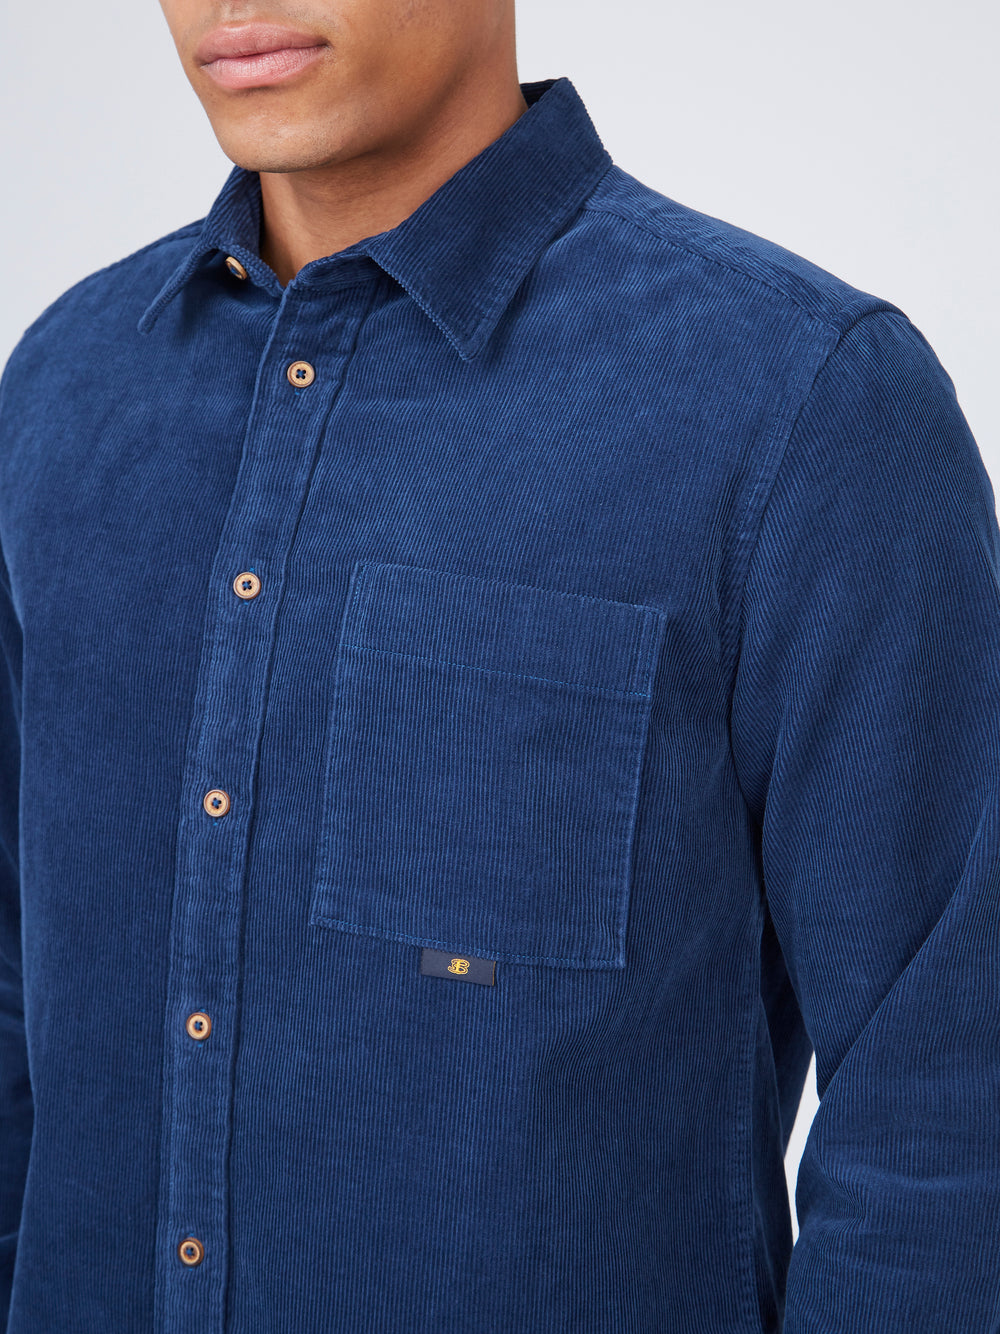 13 Best Corduroy Shirts for Men to Buy in 2023